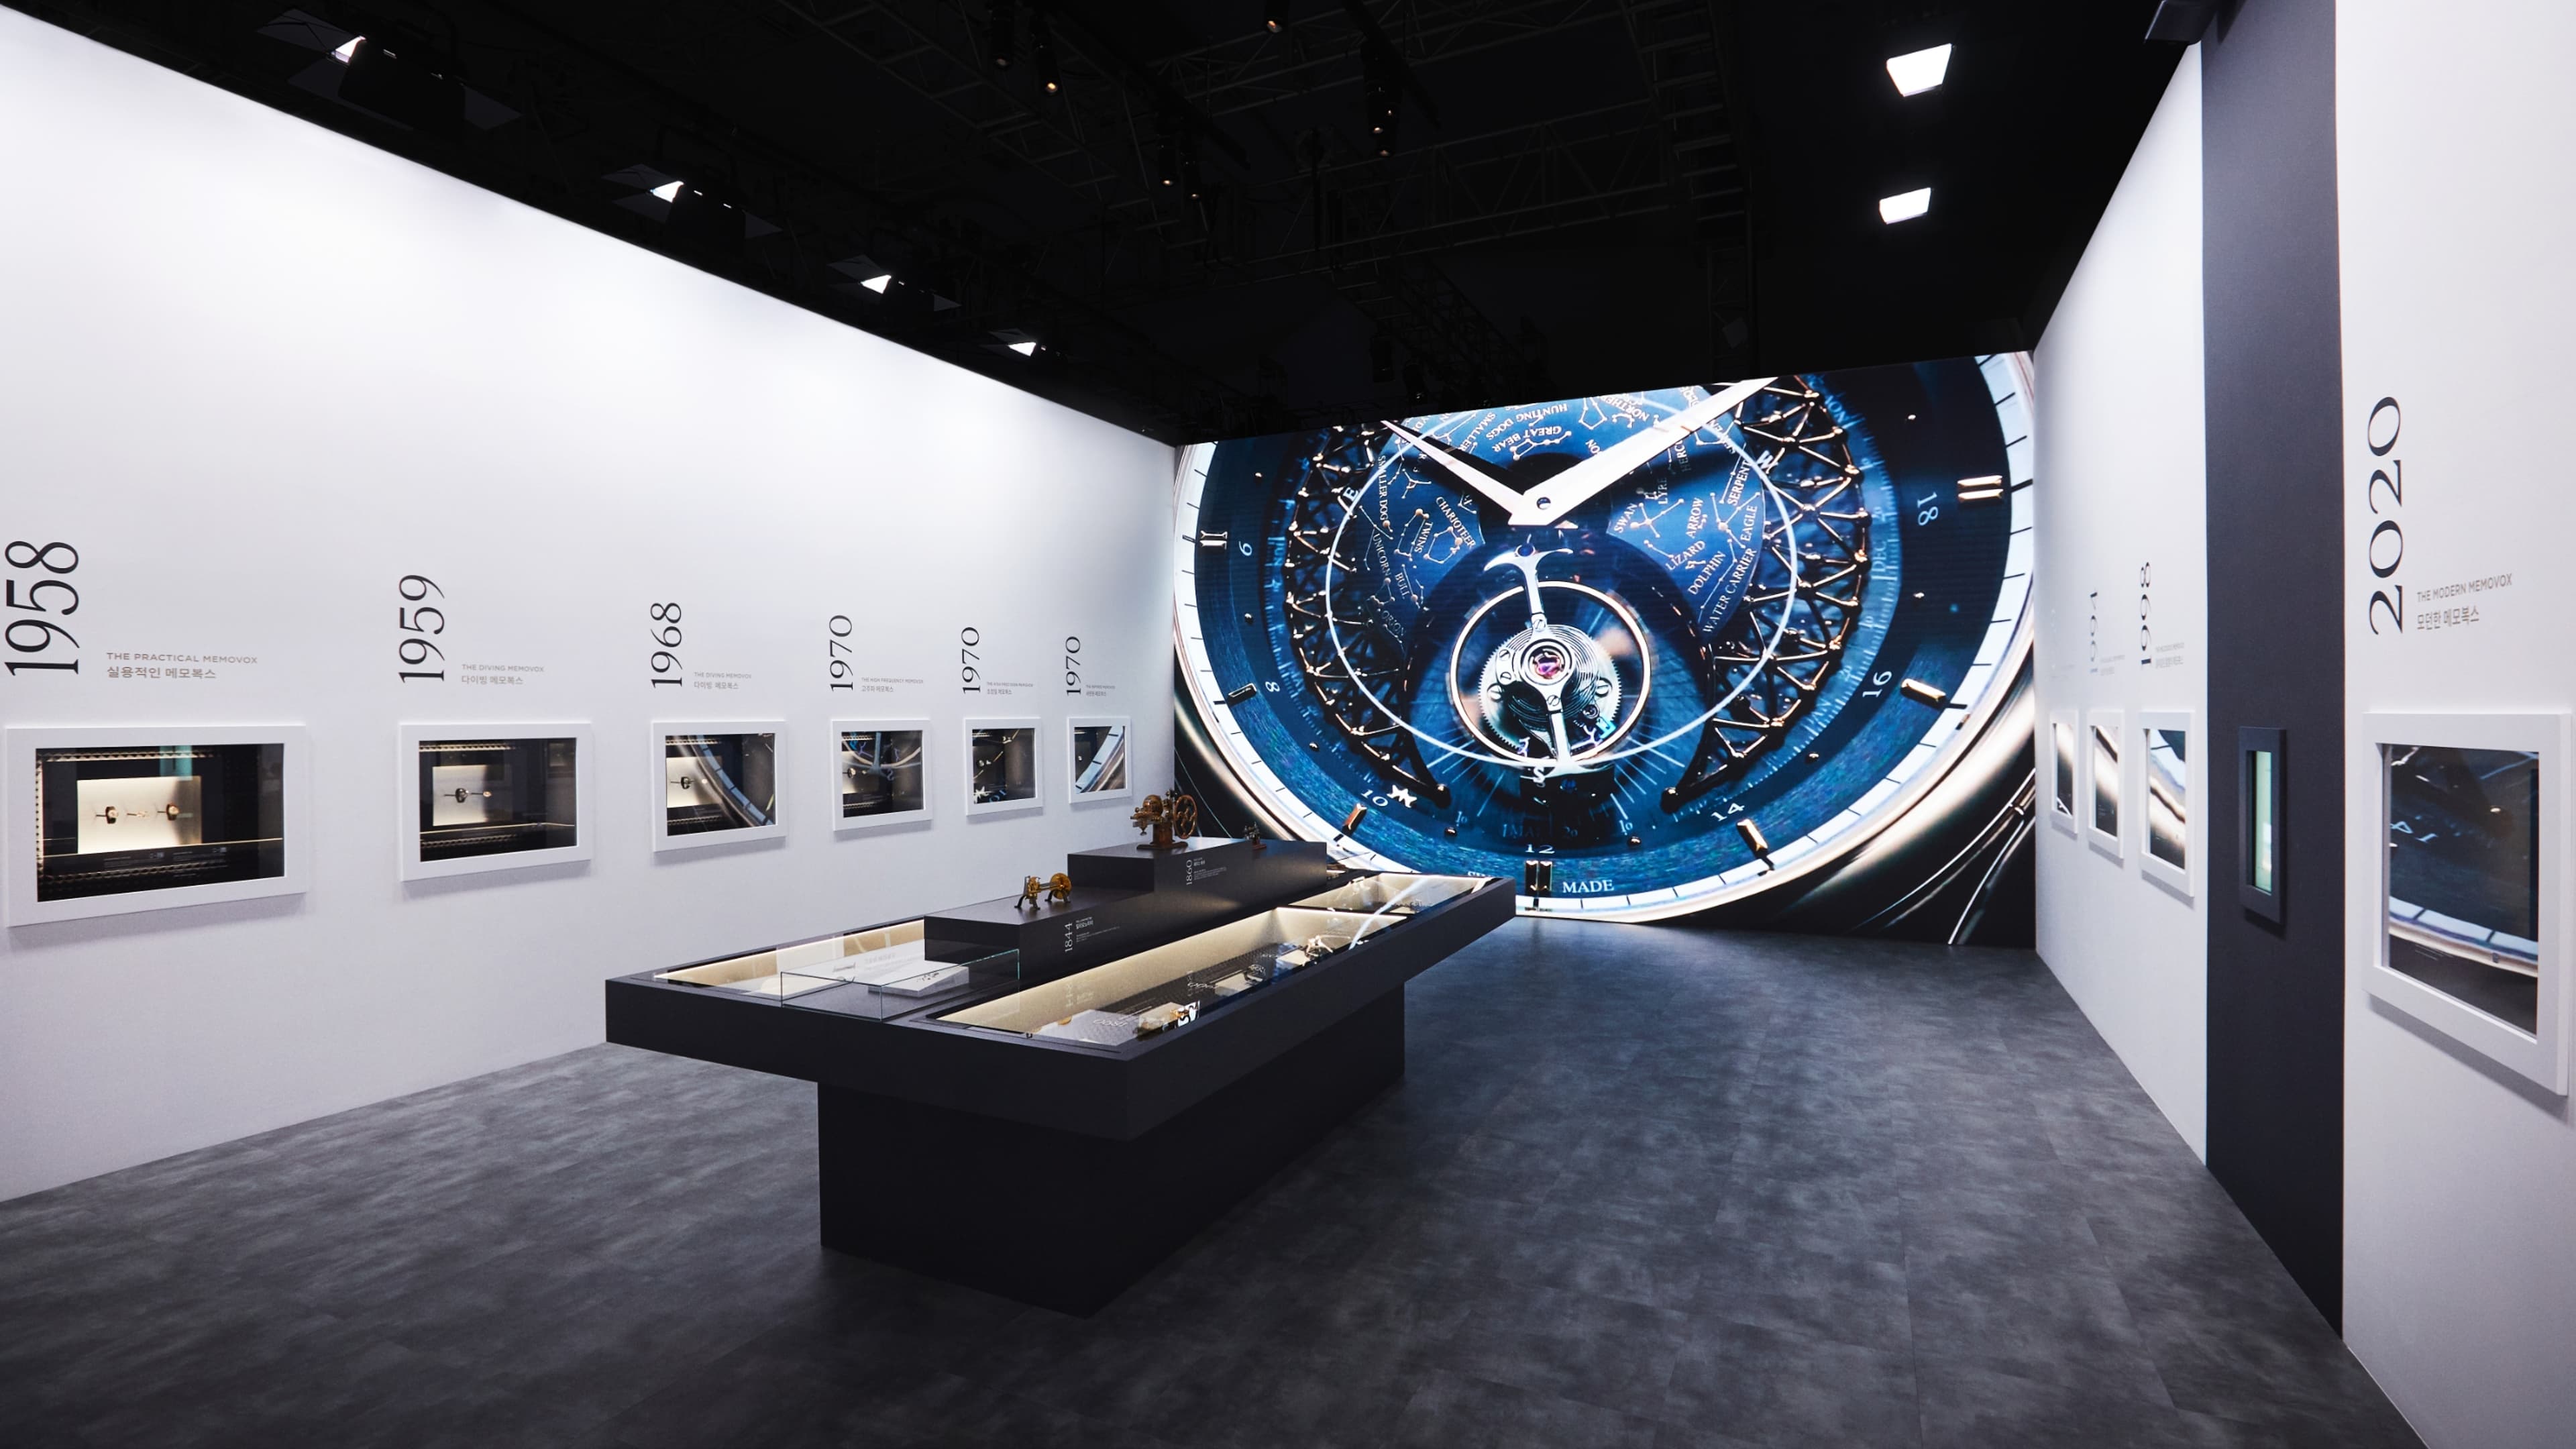 Patek Philippe's “The Art of Watches Grand Exhibition” Arrives in New York  - Whitewall